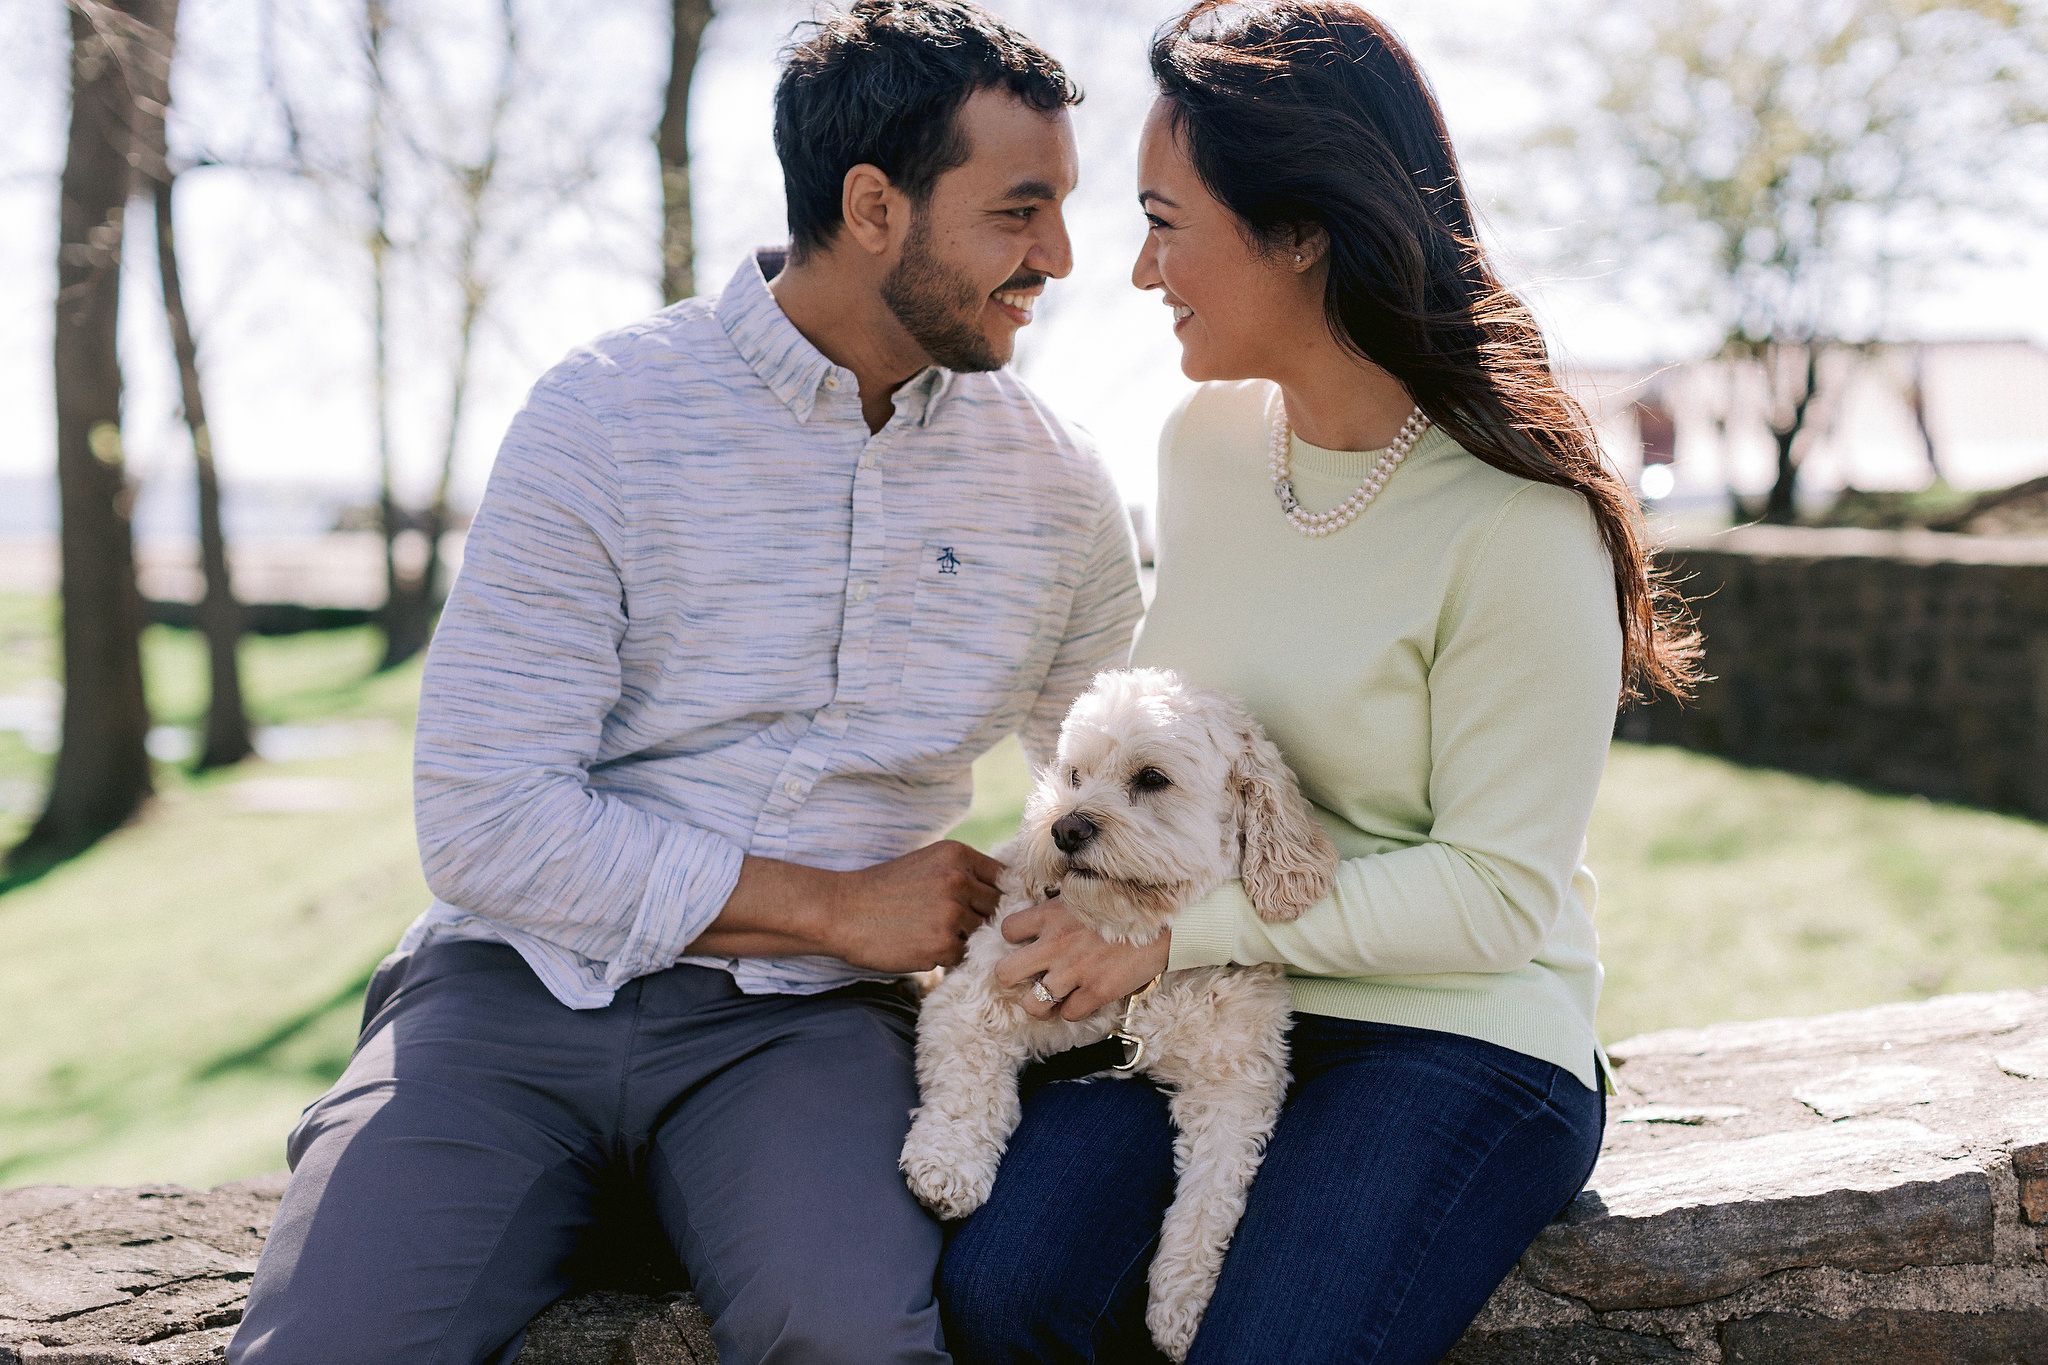 The couple are happily looking at each other while holding their dog. NYC spring engagement Image by Jenny Fu Studio